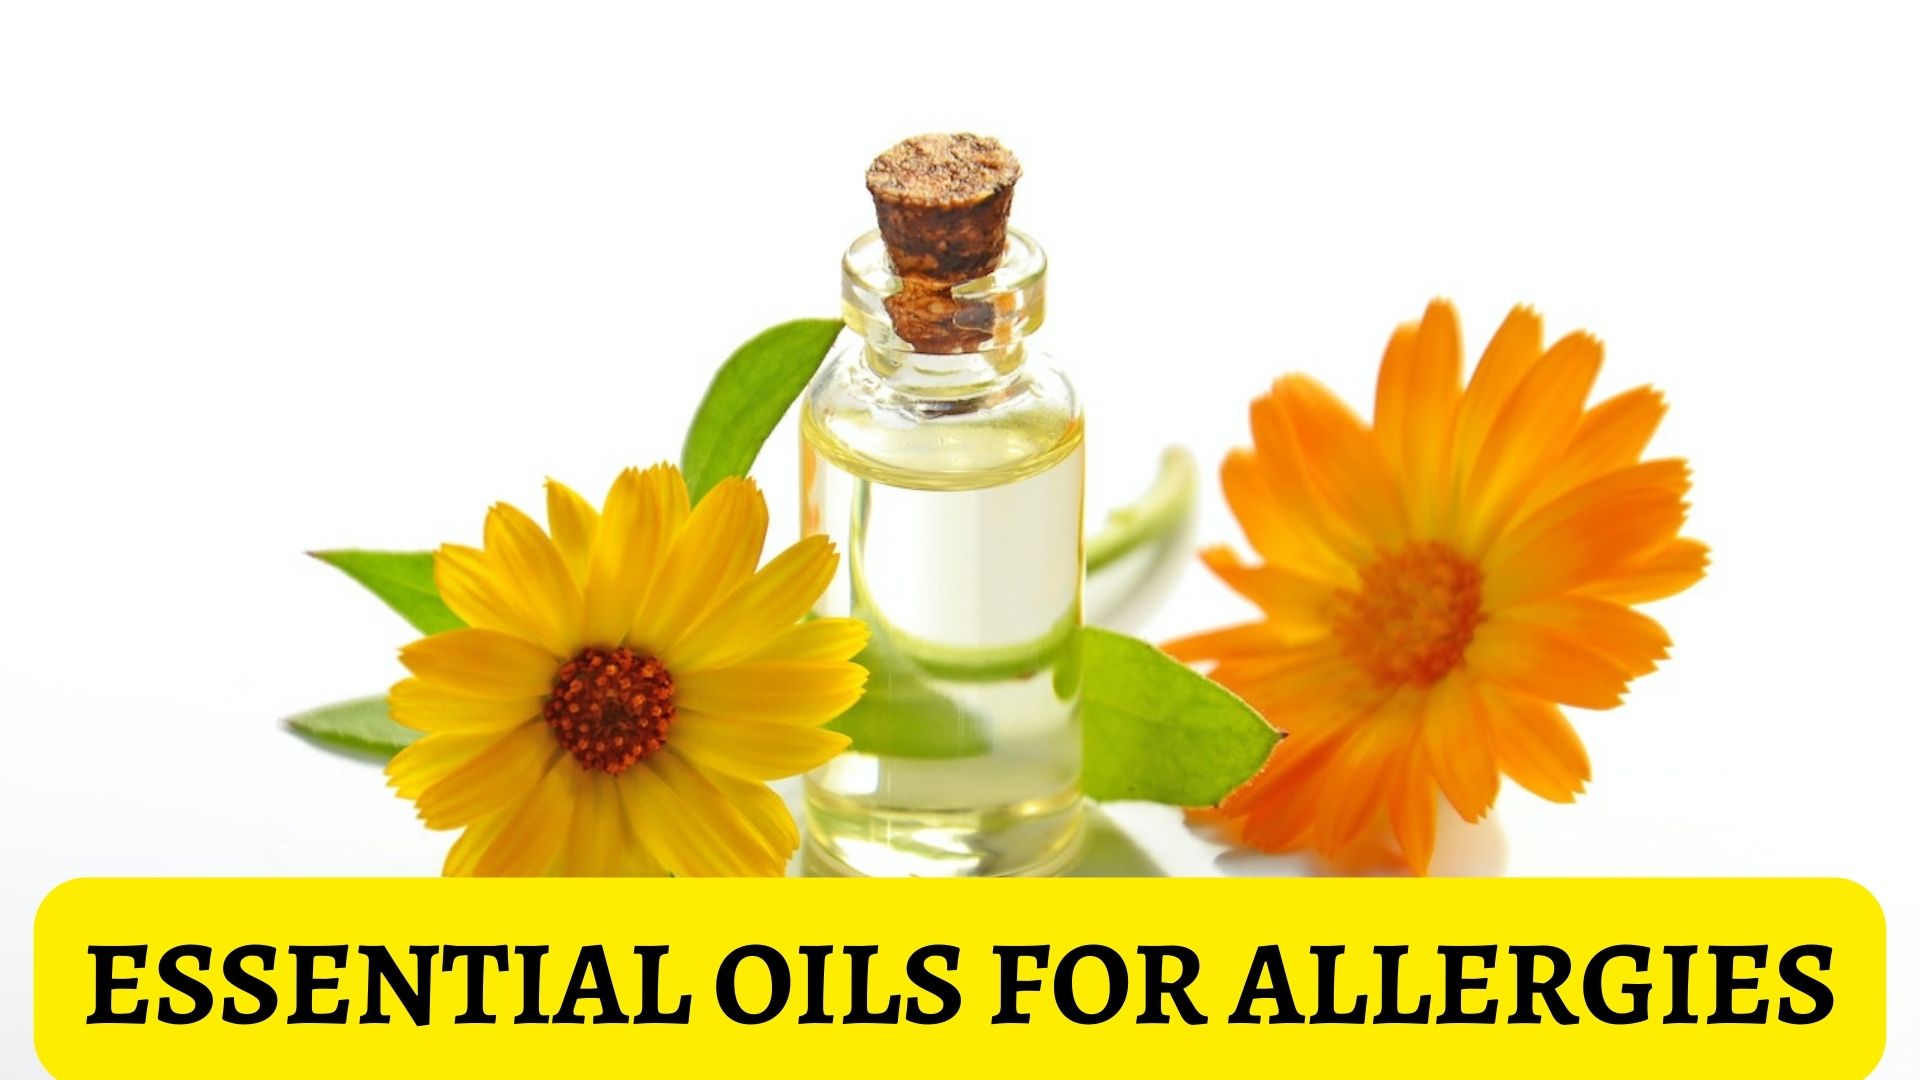 Essential Oils For Allergies - Best Way To Tackle Most Allergic Reactions